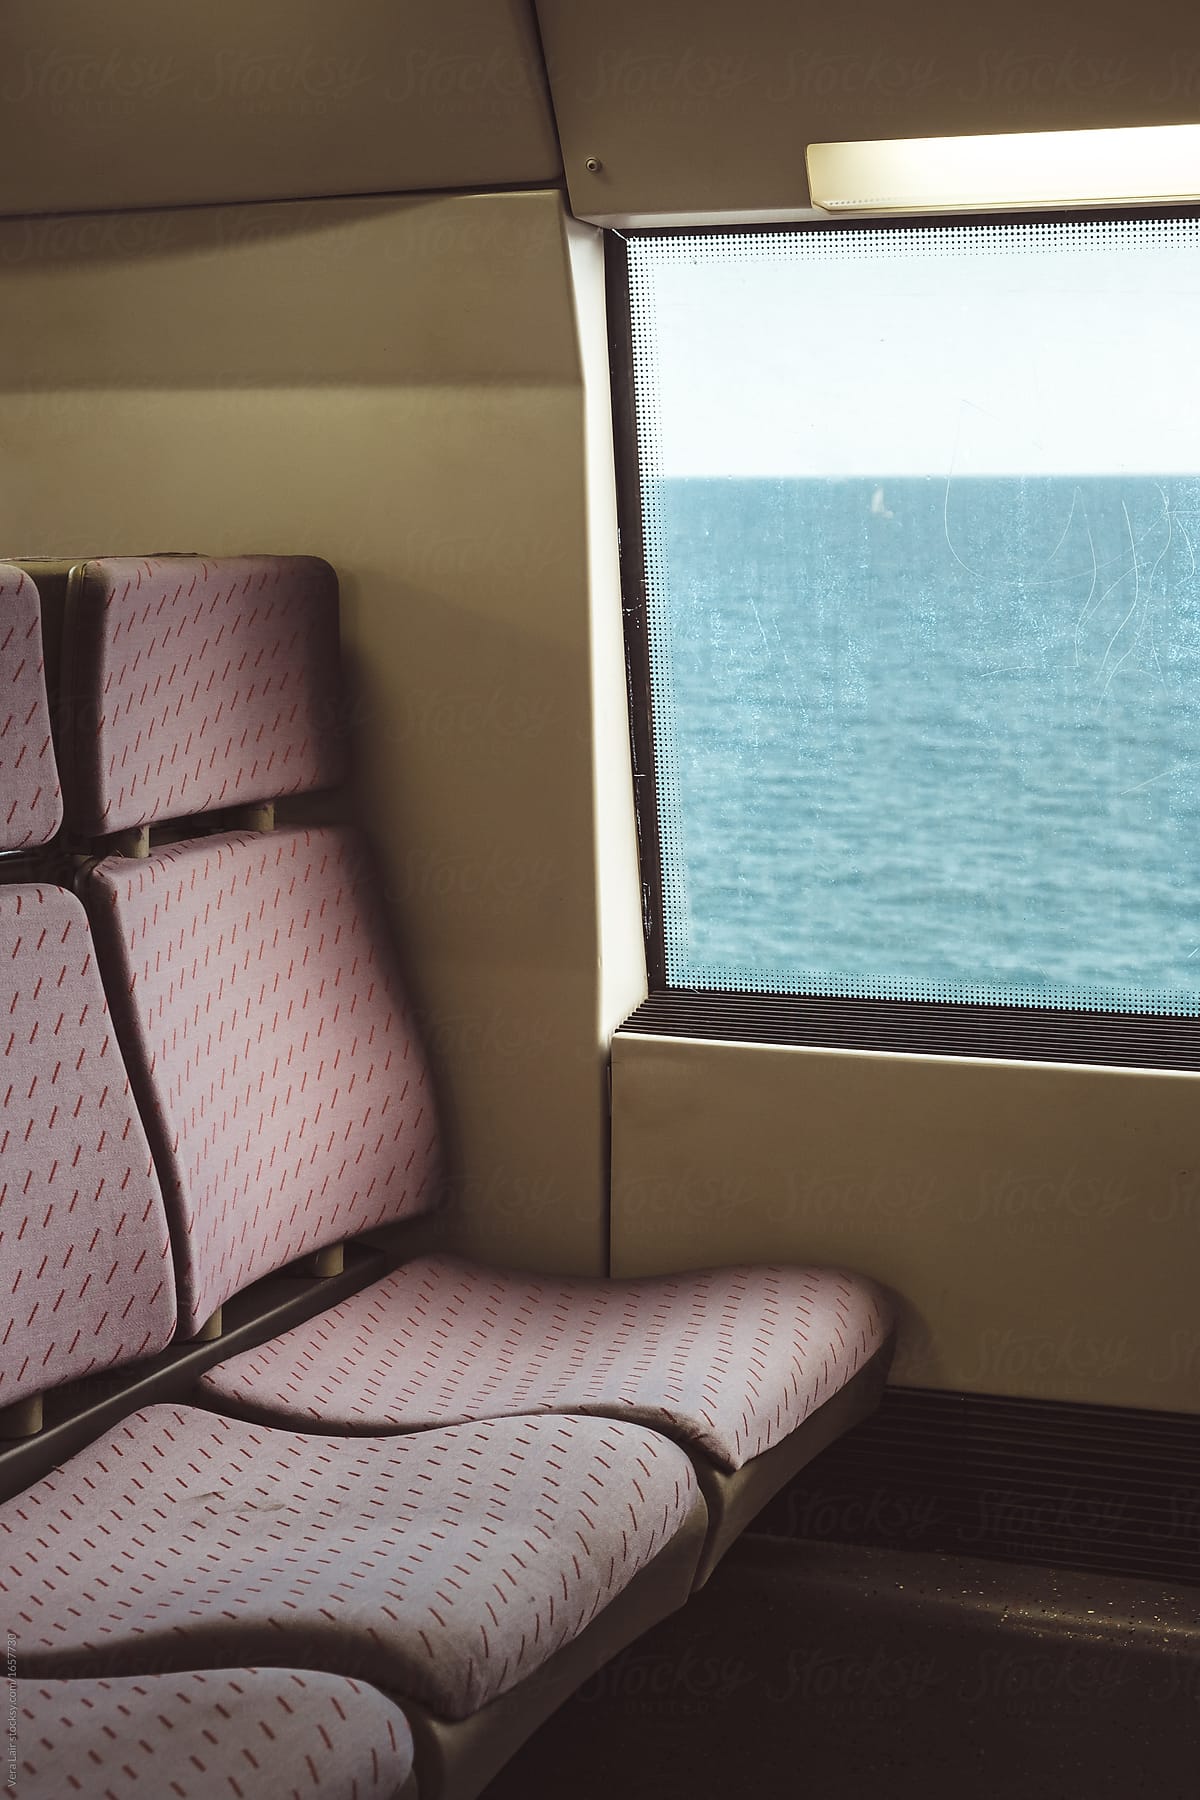 In the train with a sea view